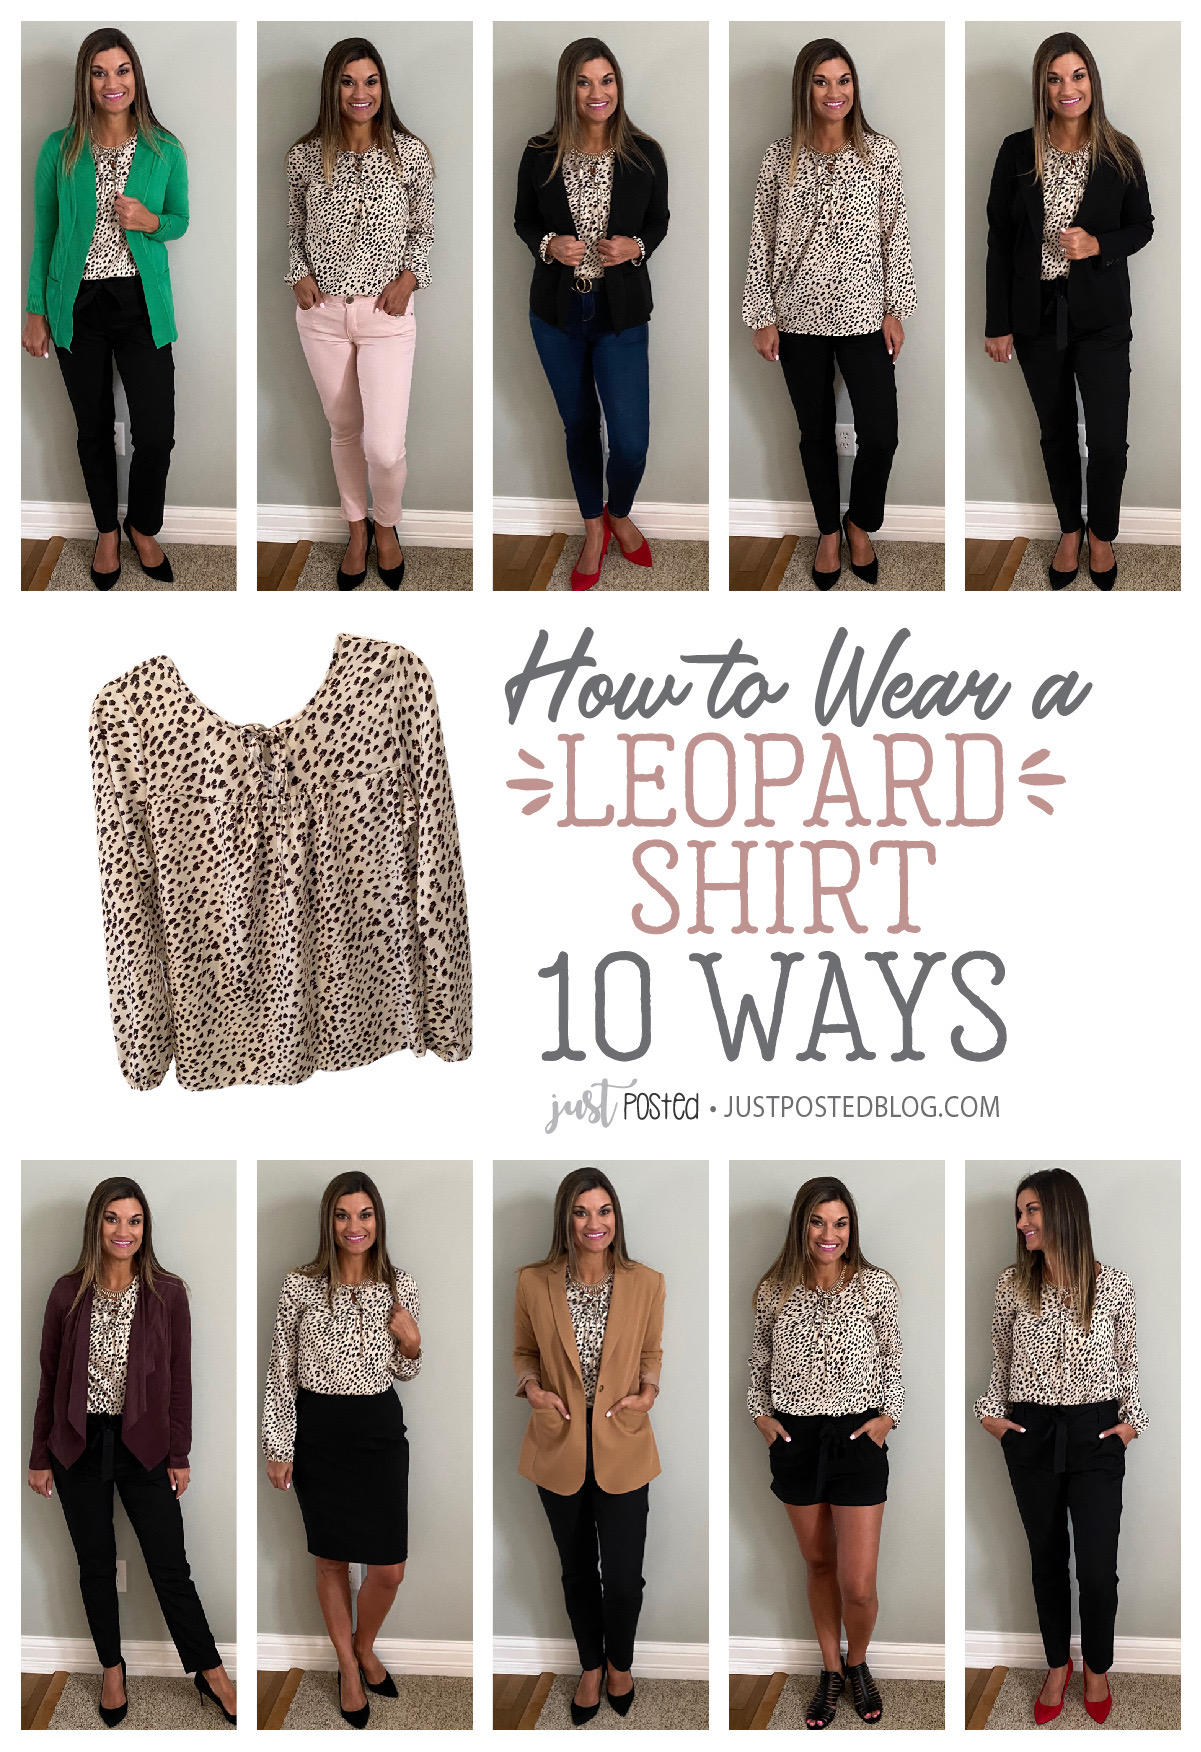 How to Wear a Leopard Print Shirt Ten Ways – Just Posted